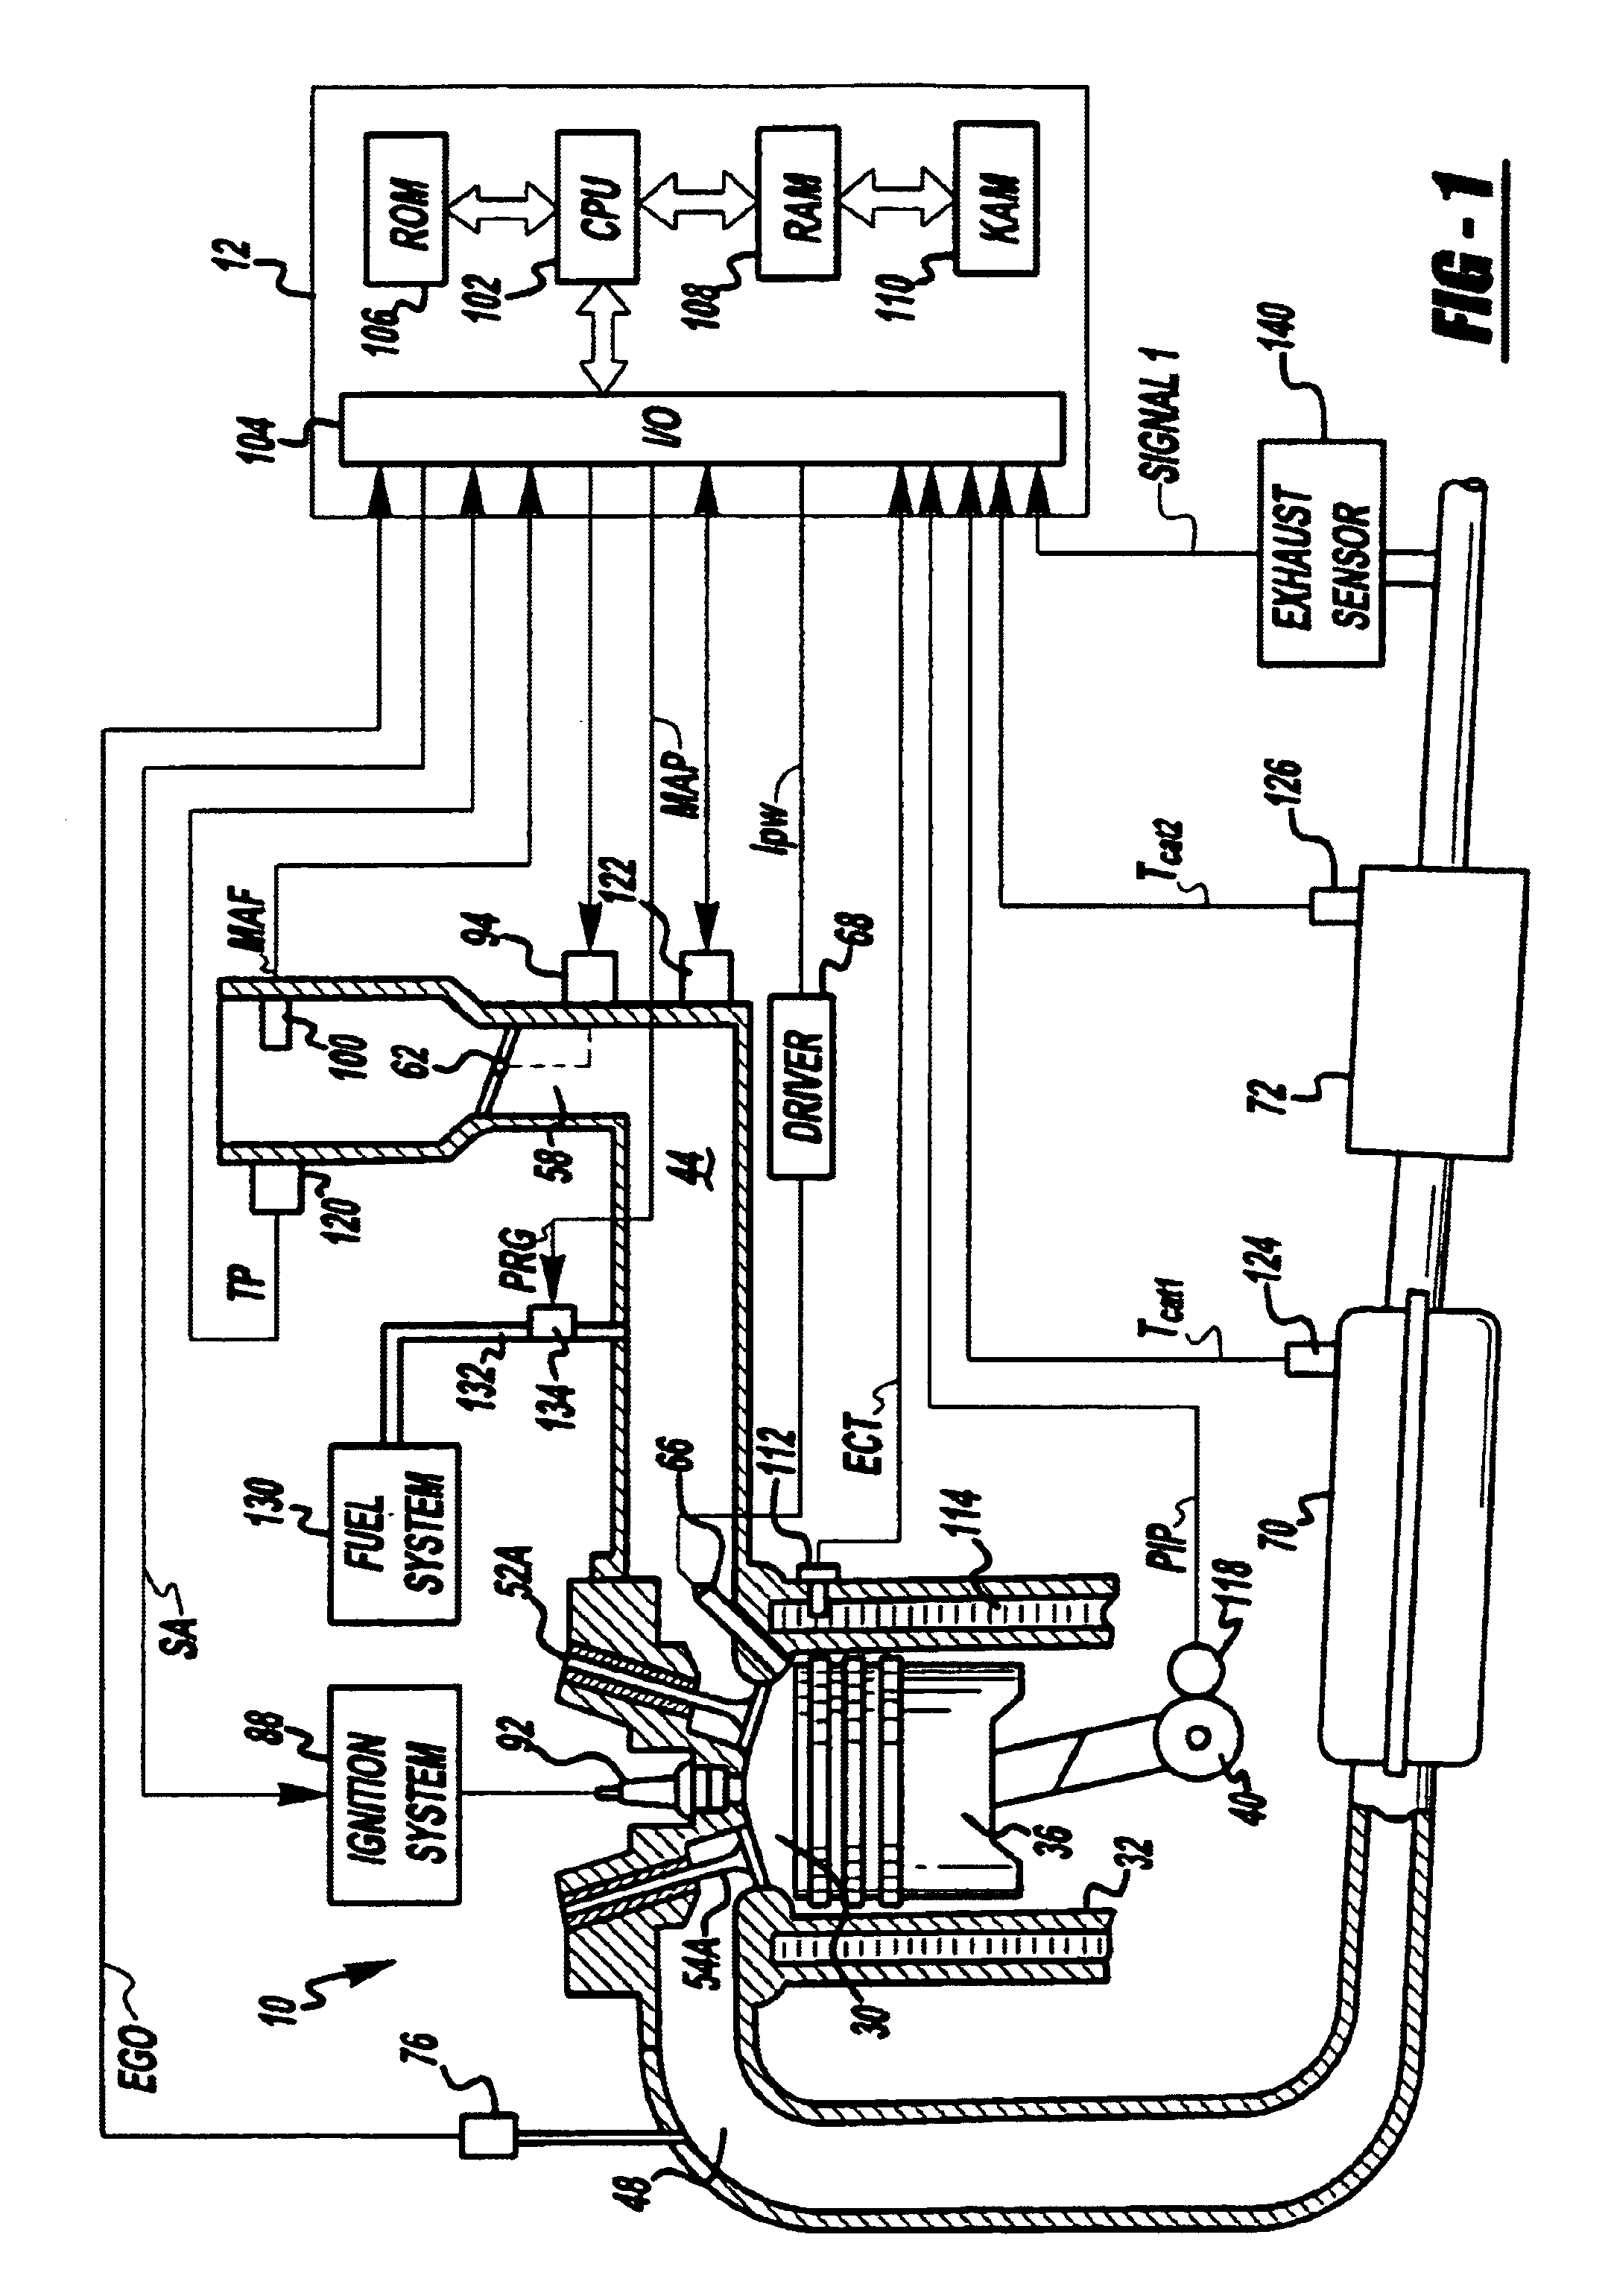 Computer controlled engine adjustment based on an exhaust flow